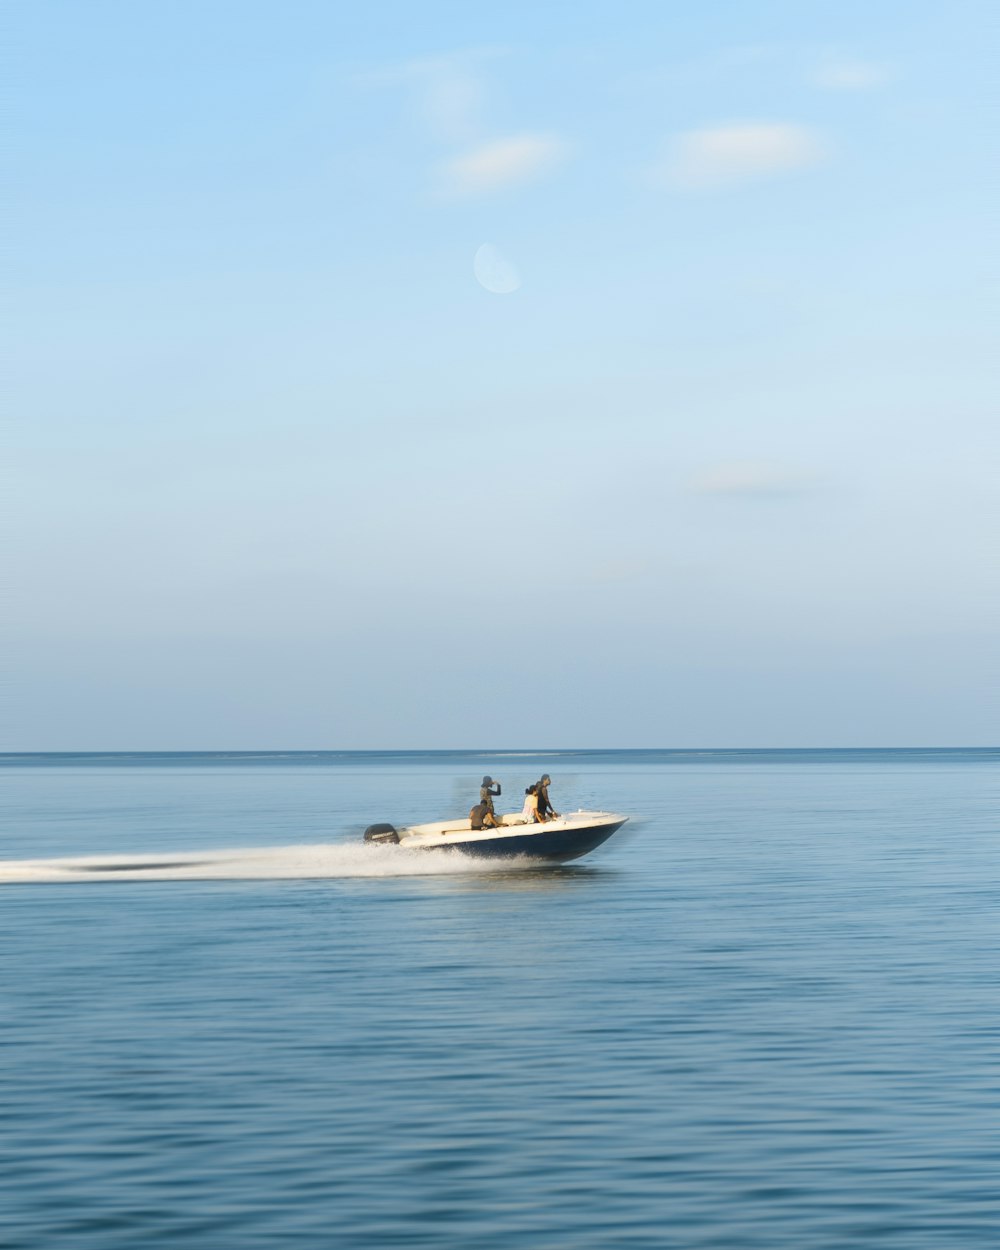 three person riding on motorboat under white clouds at daytime